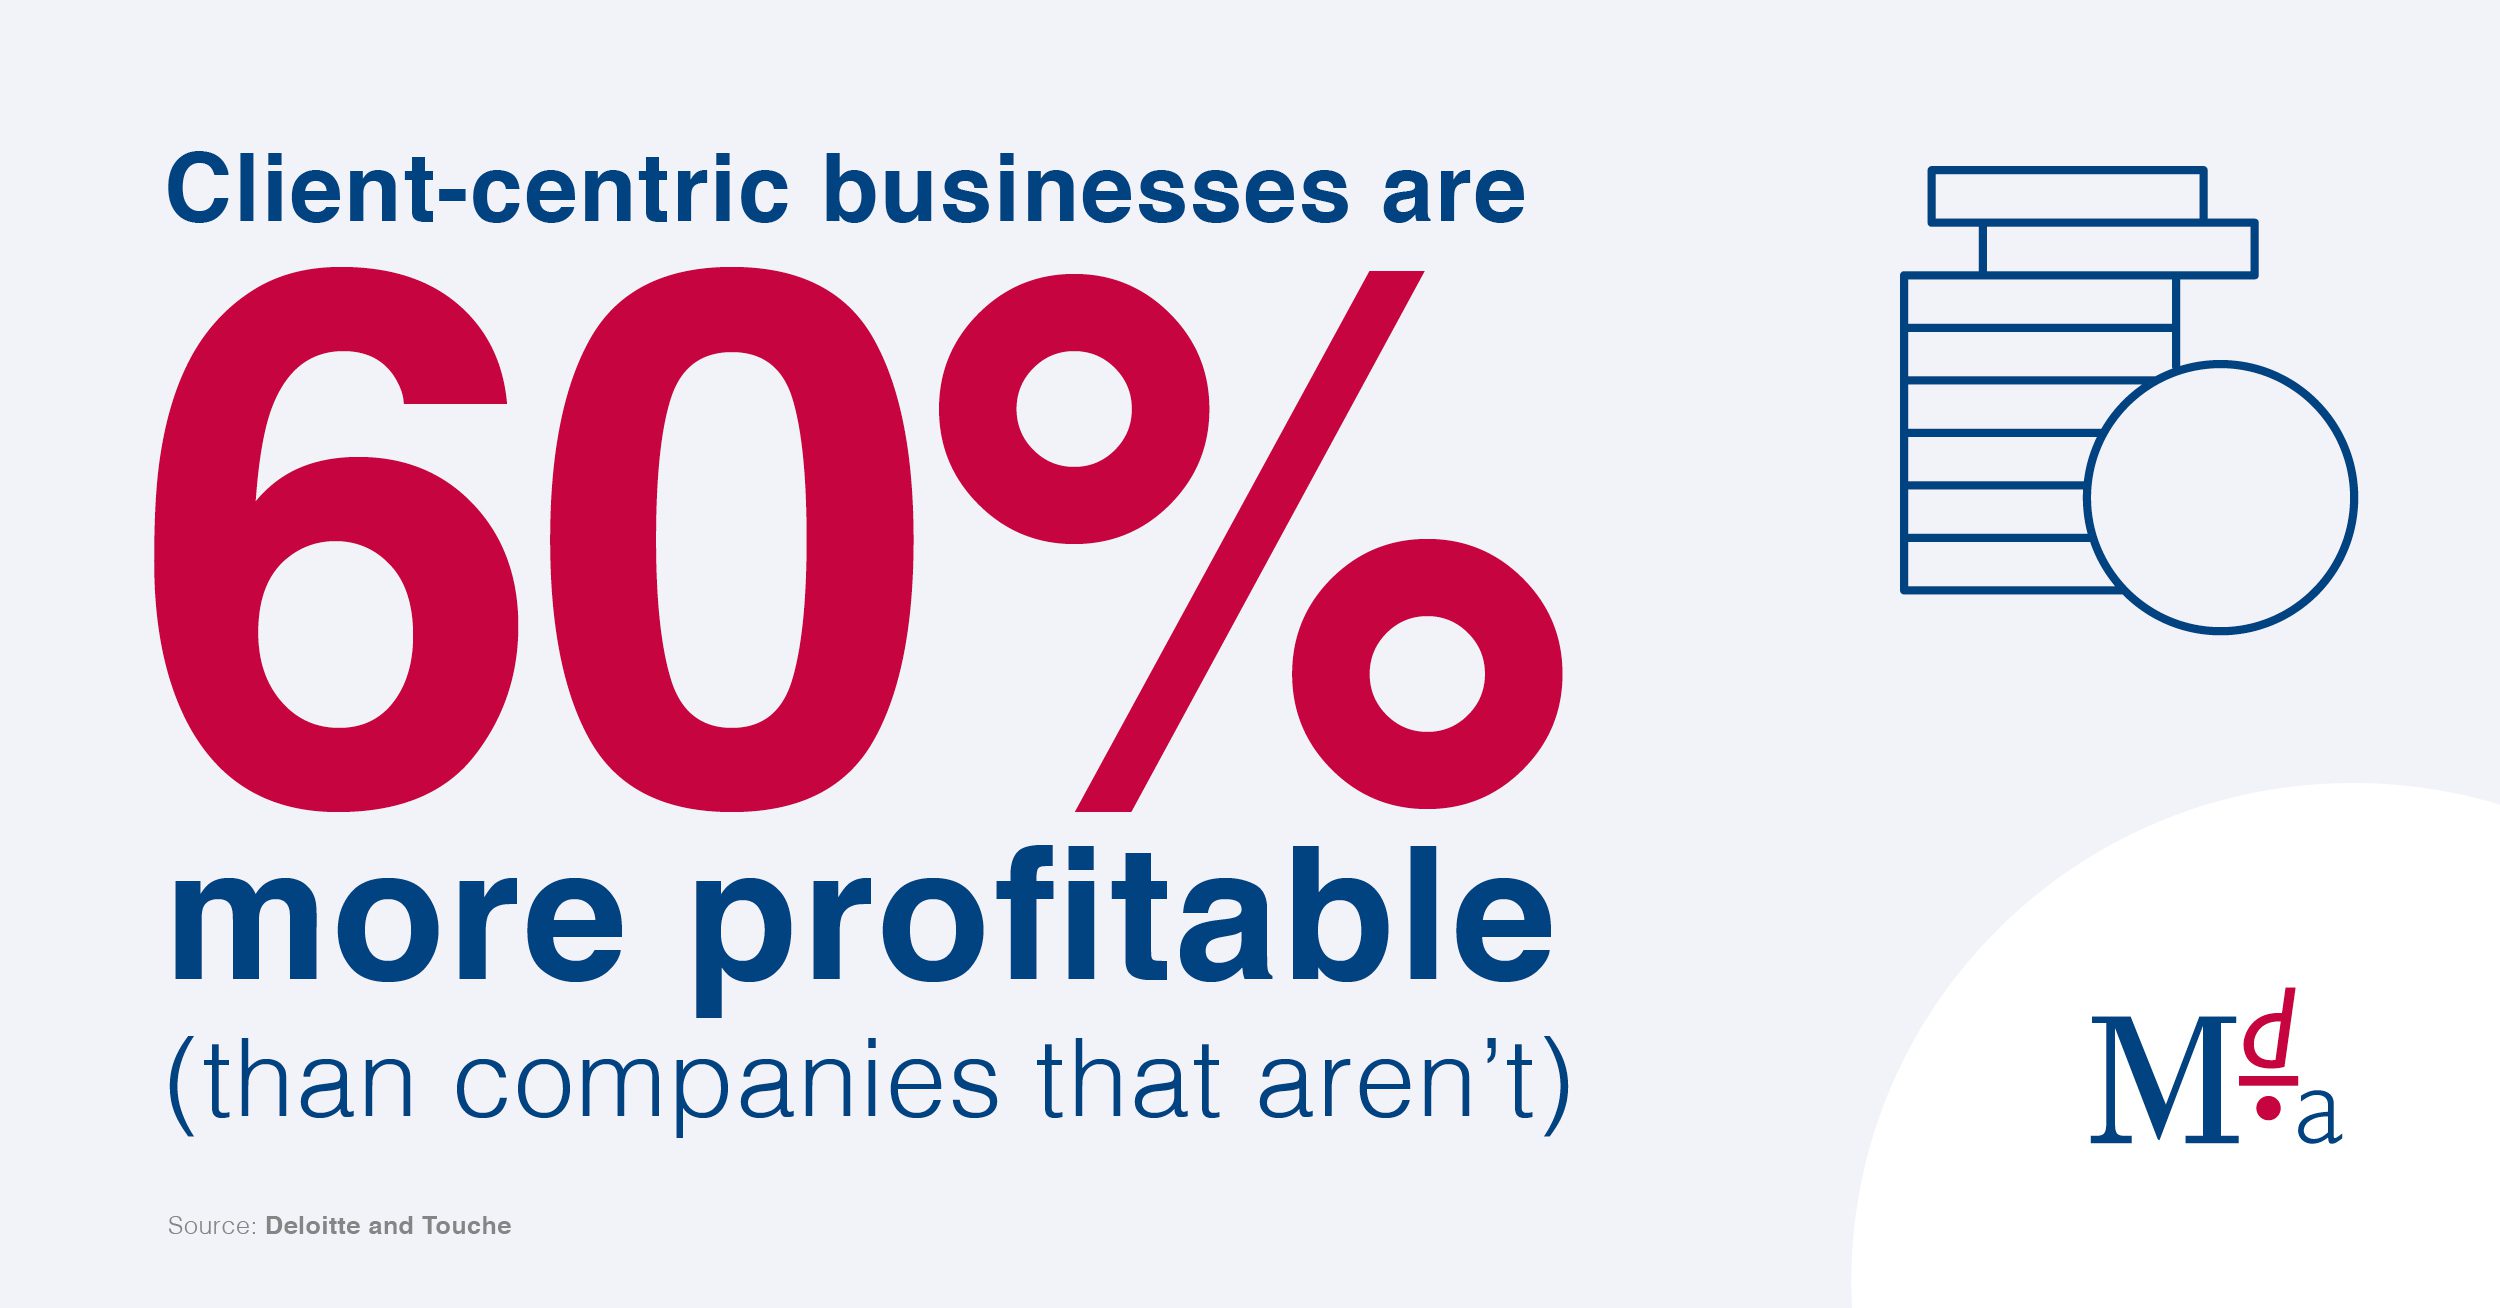 Client-centric businesses are 60% more profitable (than companies that aren’t)